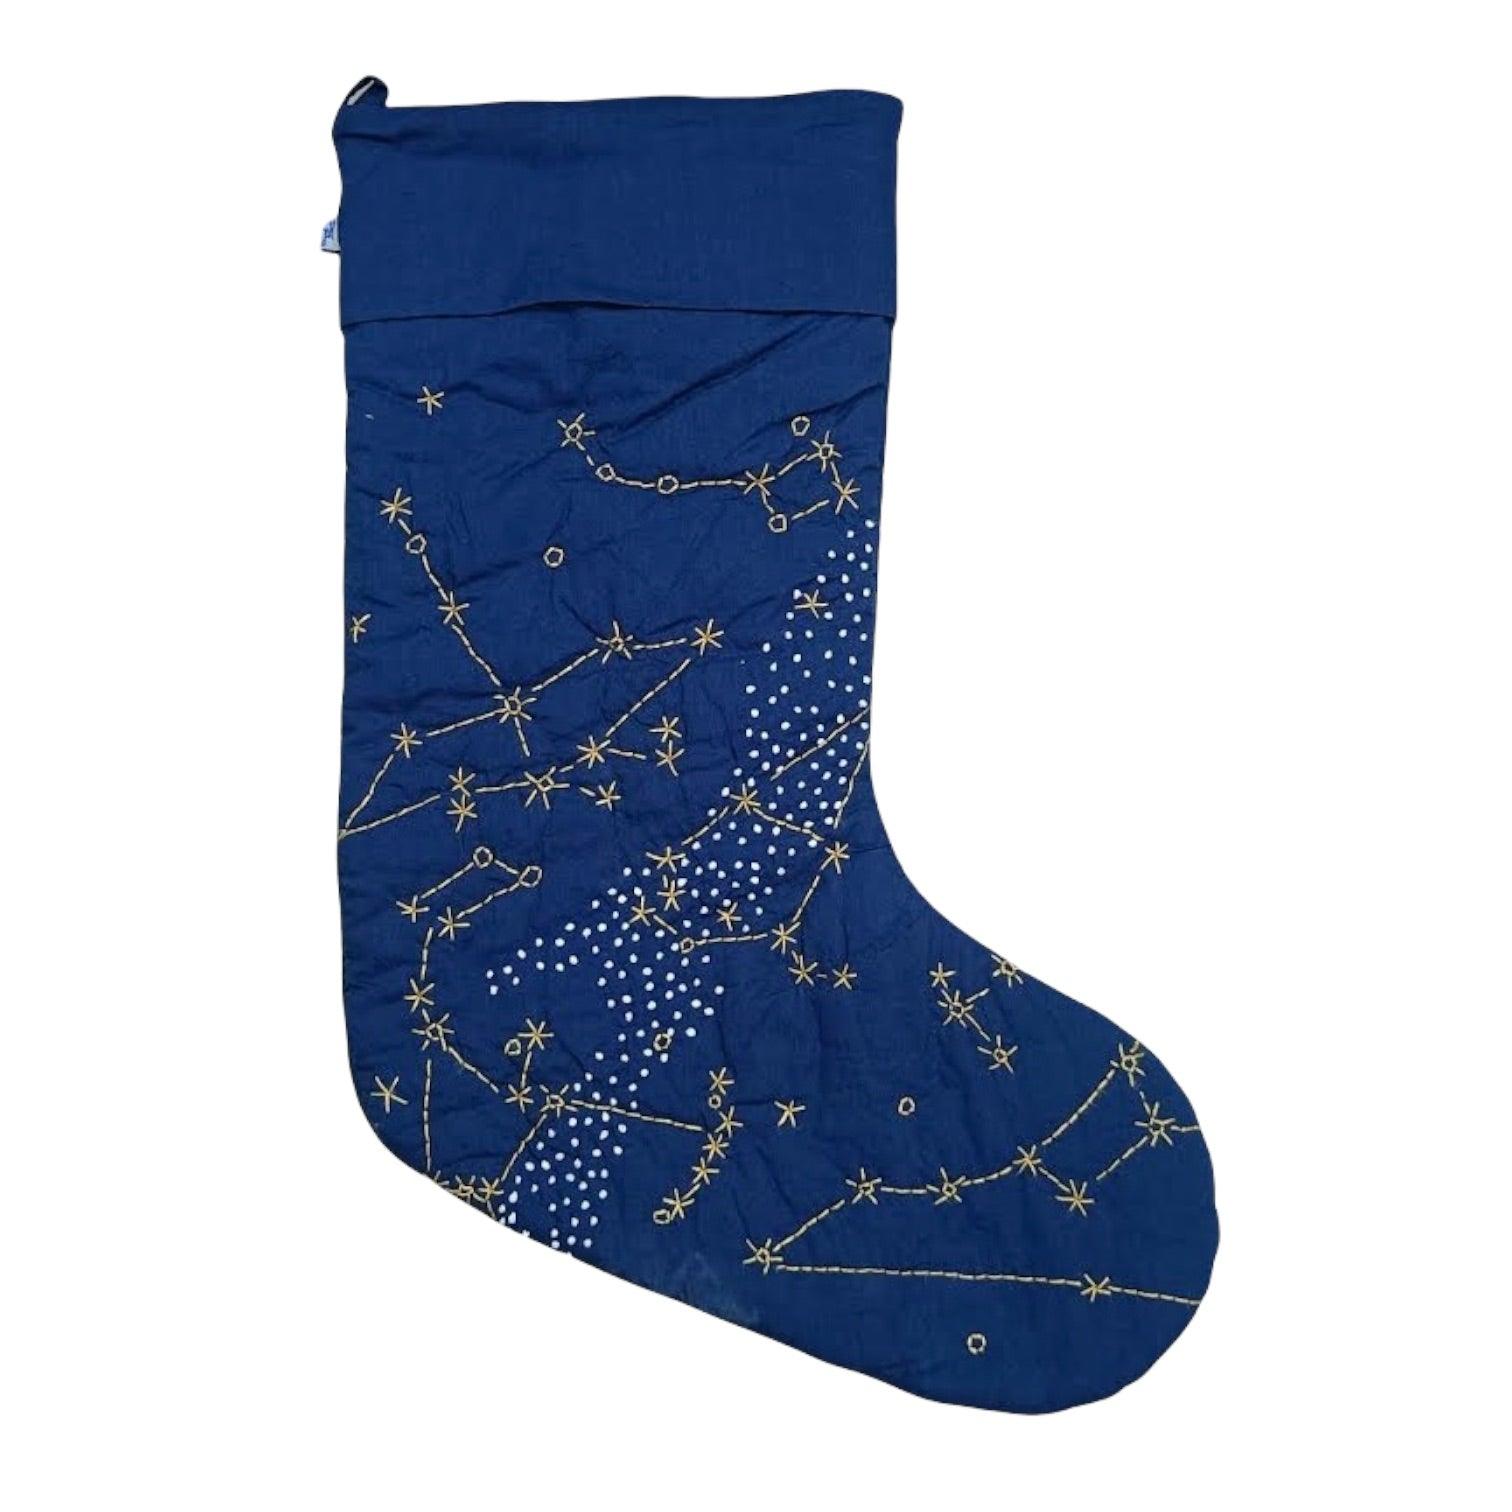 Navy Constellation Stocking with hand quilted gold constellations and a milky way made out of french knots. 